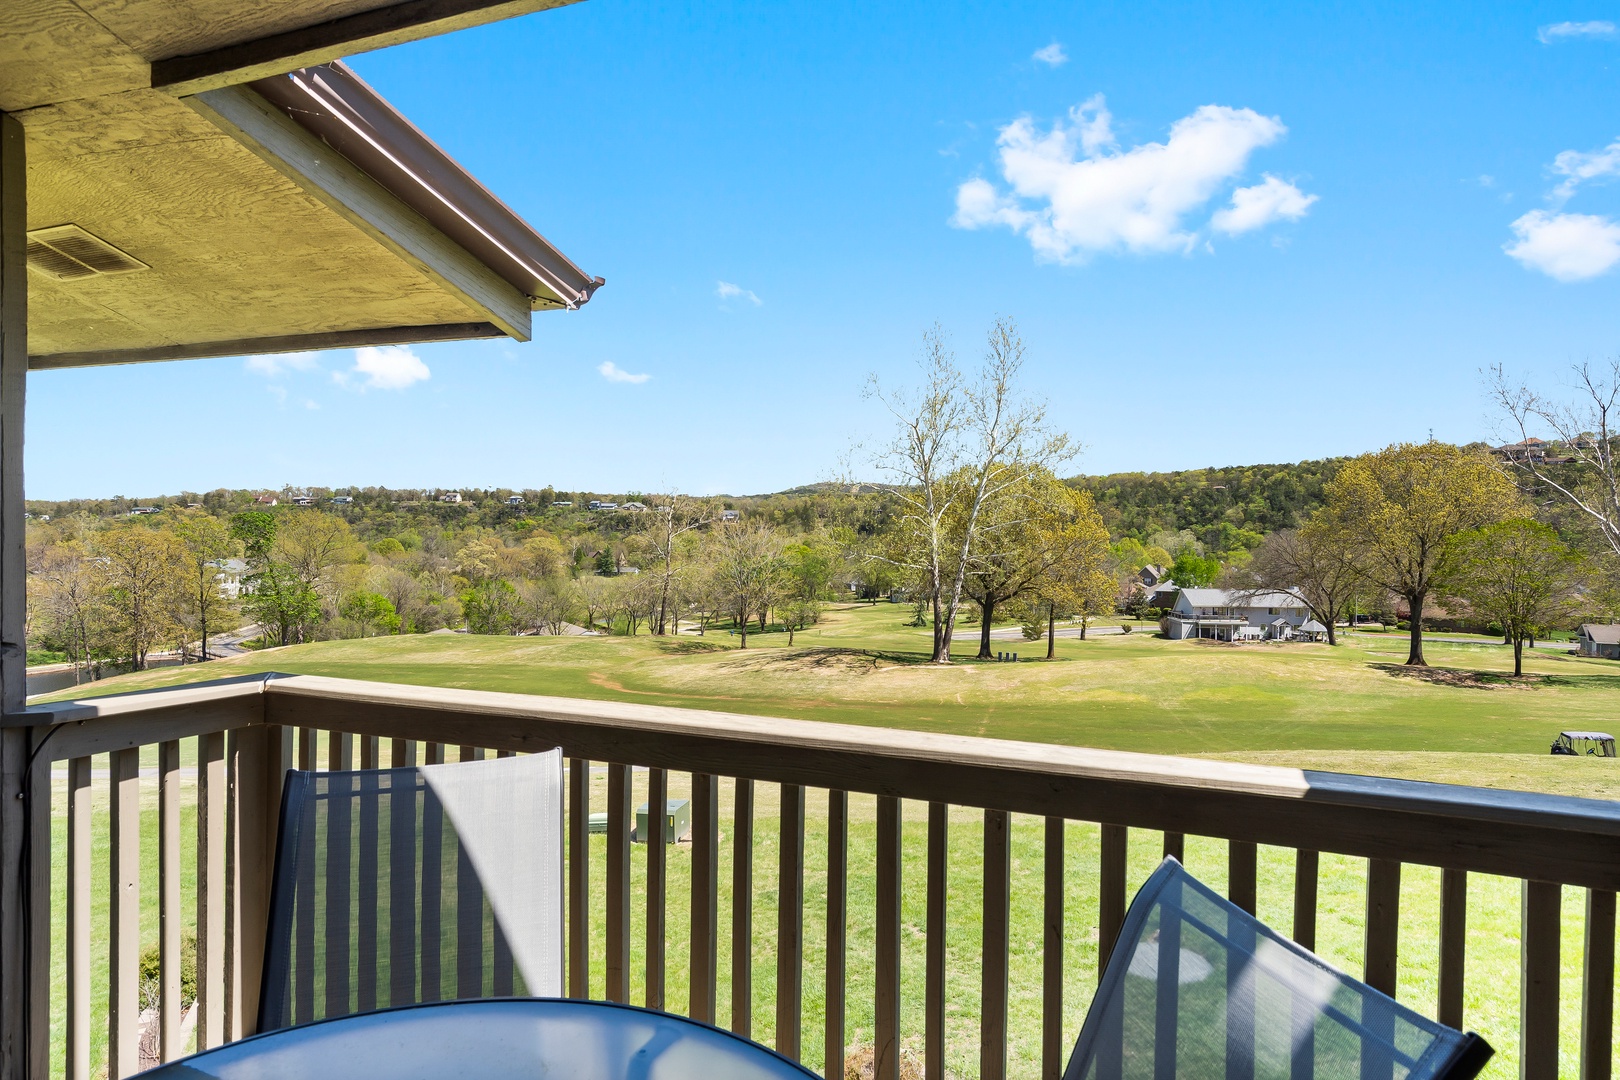 Stunning golf course views await from Unit 20’s shaded balcony